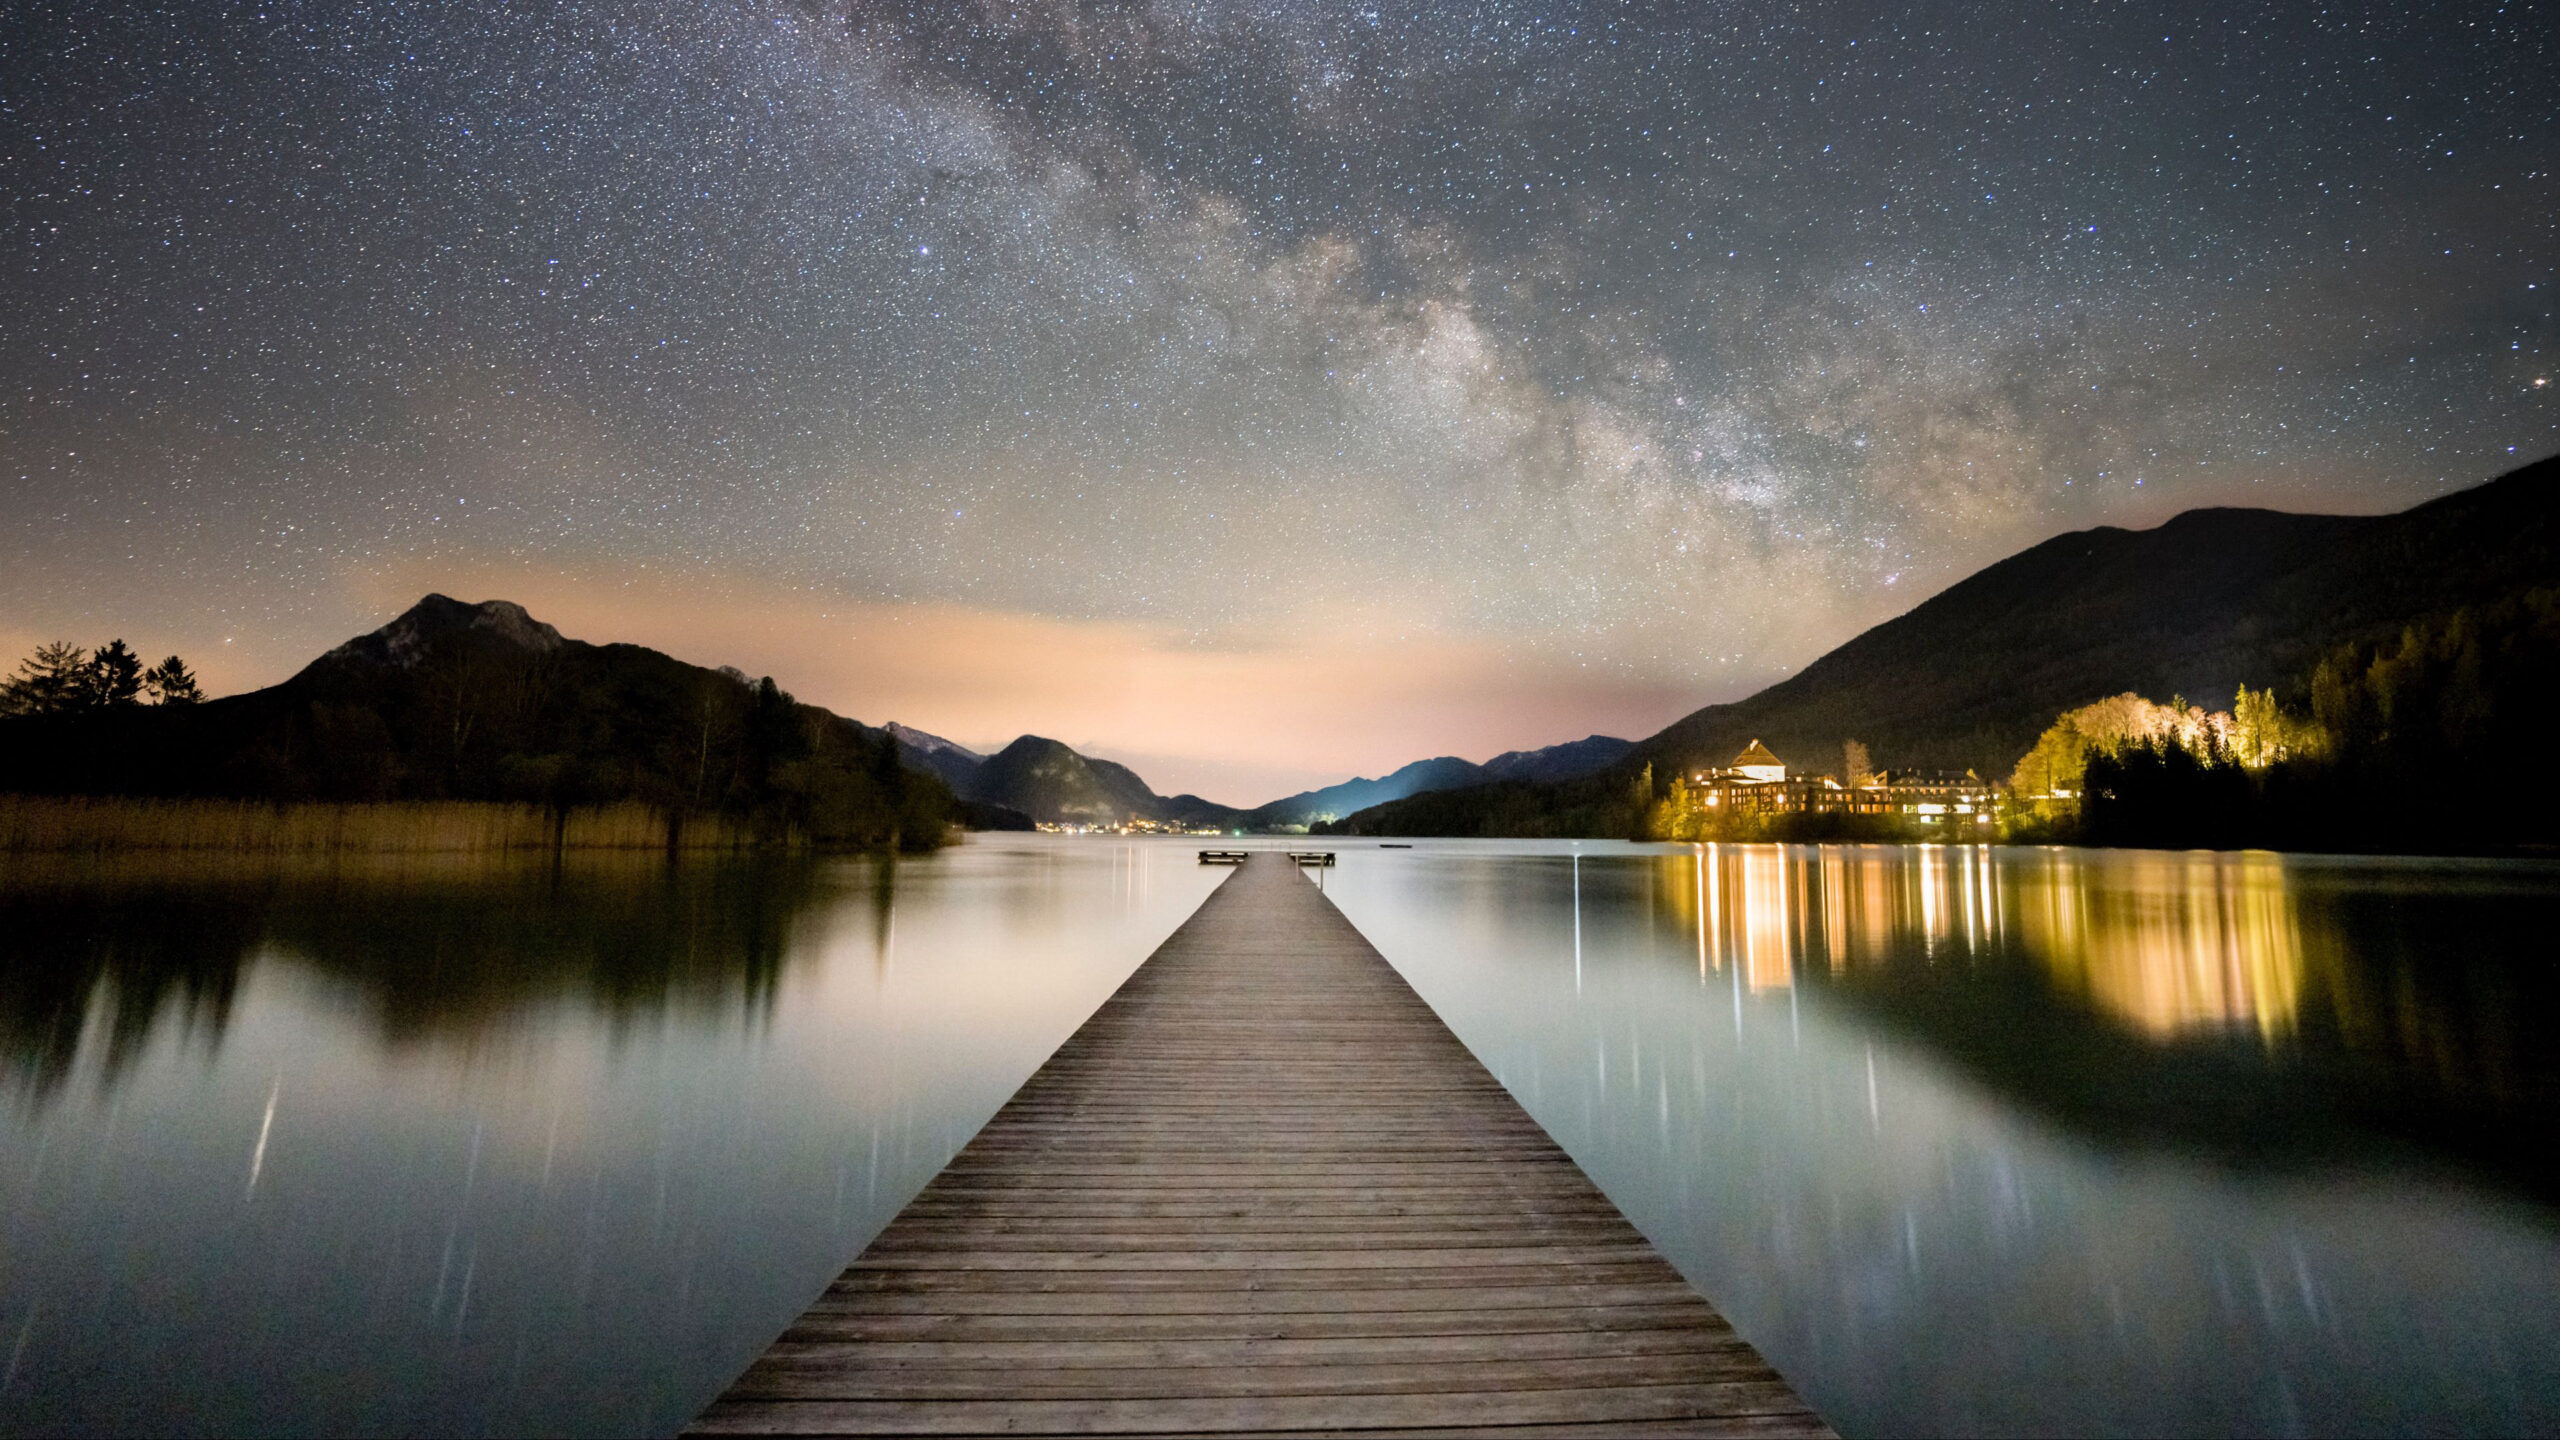 Pier Mountains Reflection On Lake Under Starry Cloudy Sky House With Lights Wood Dock K 2K Nature